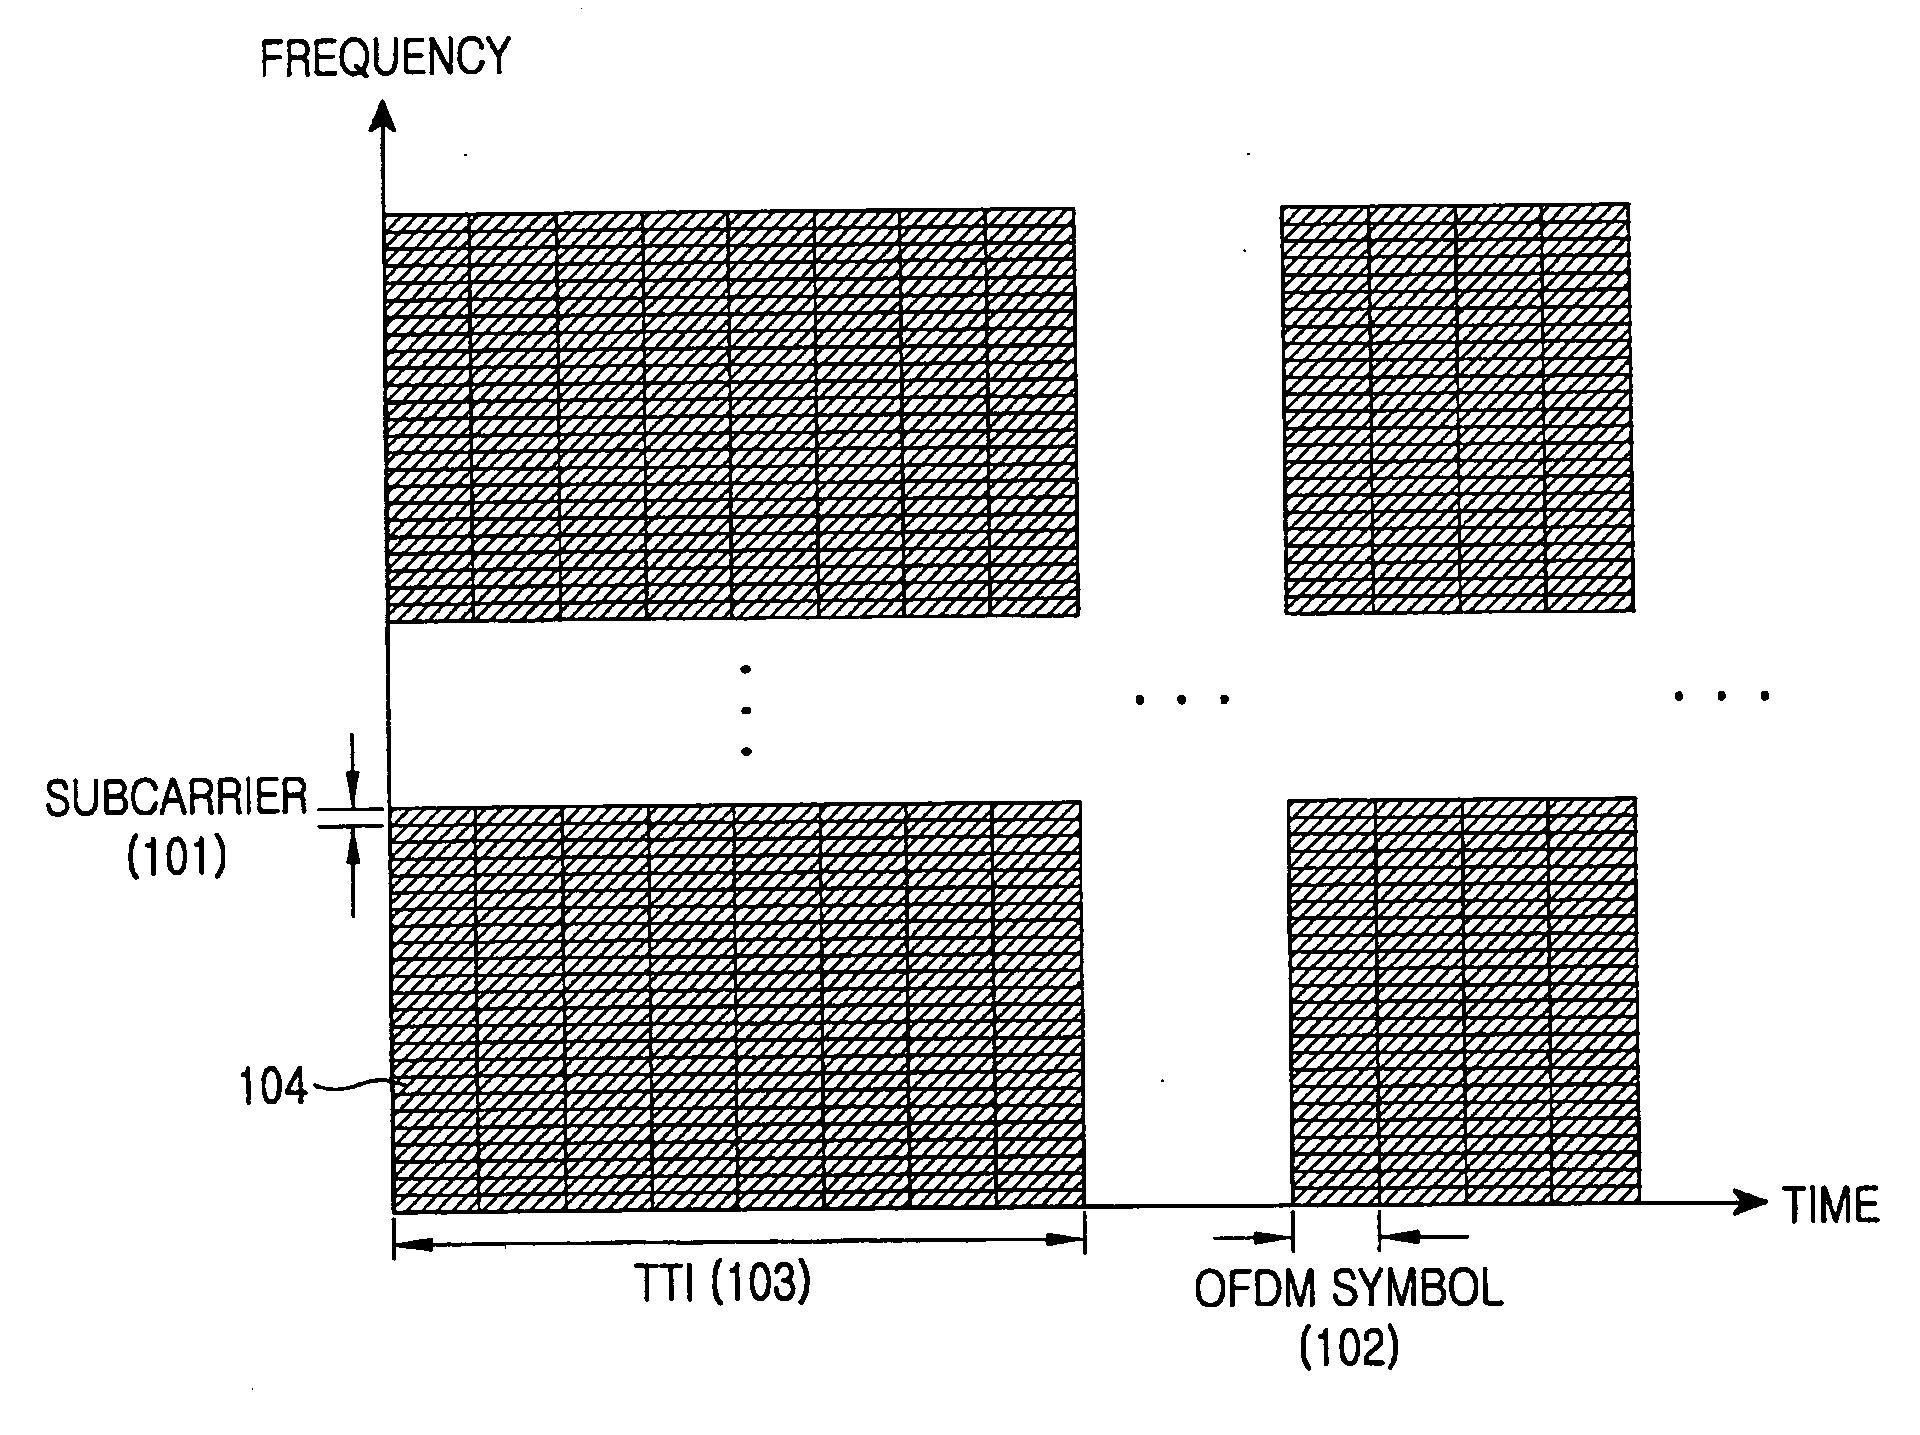 Method for signaling resource assignment information in a frequency division multiple access system